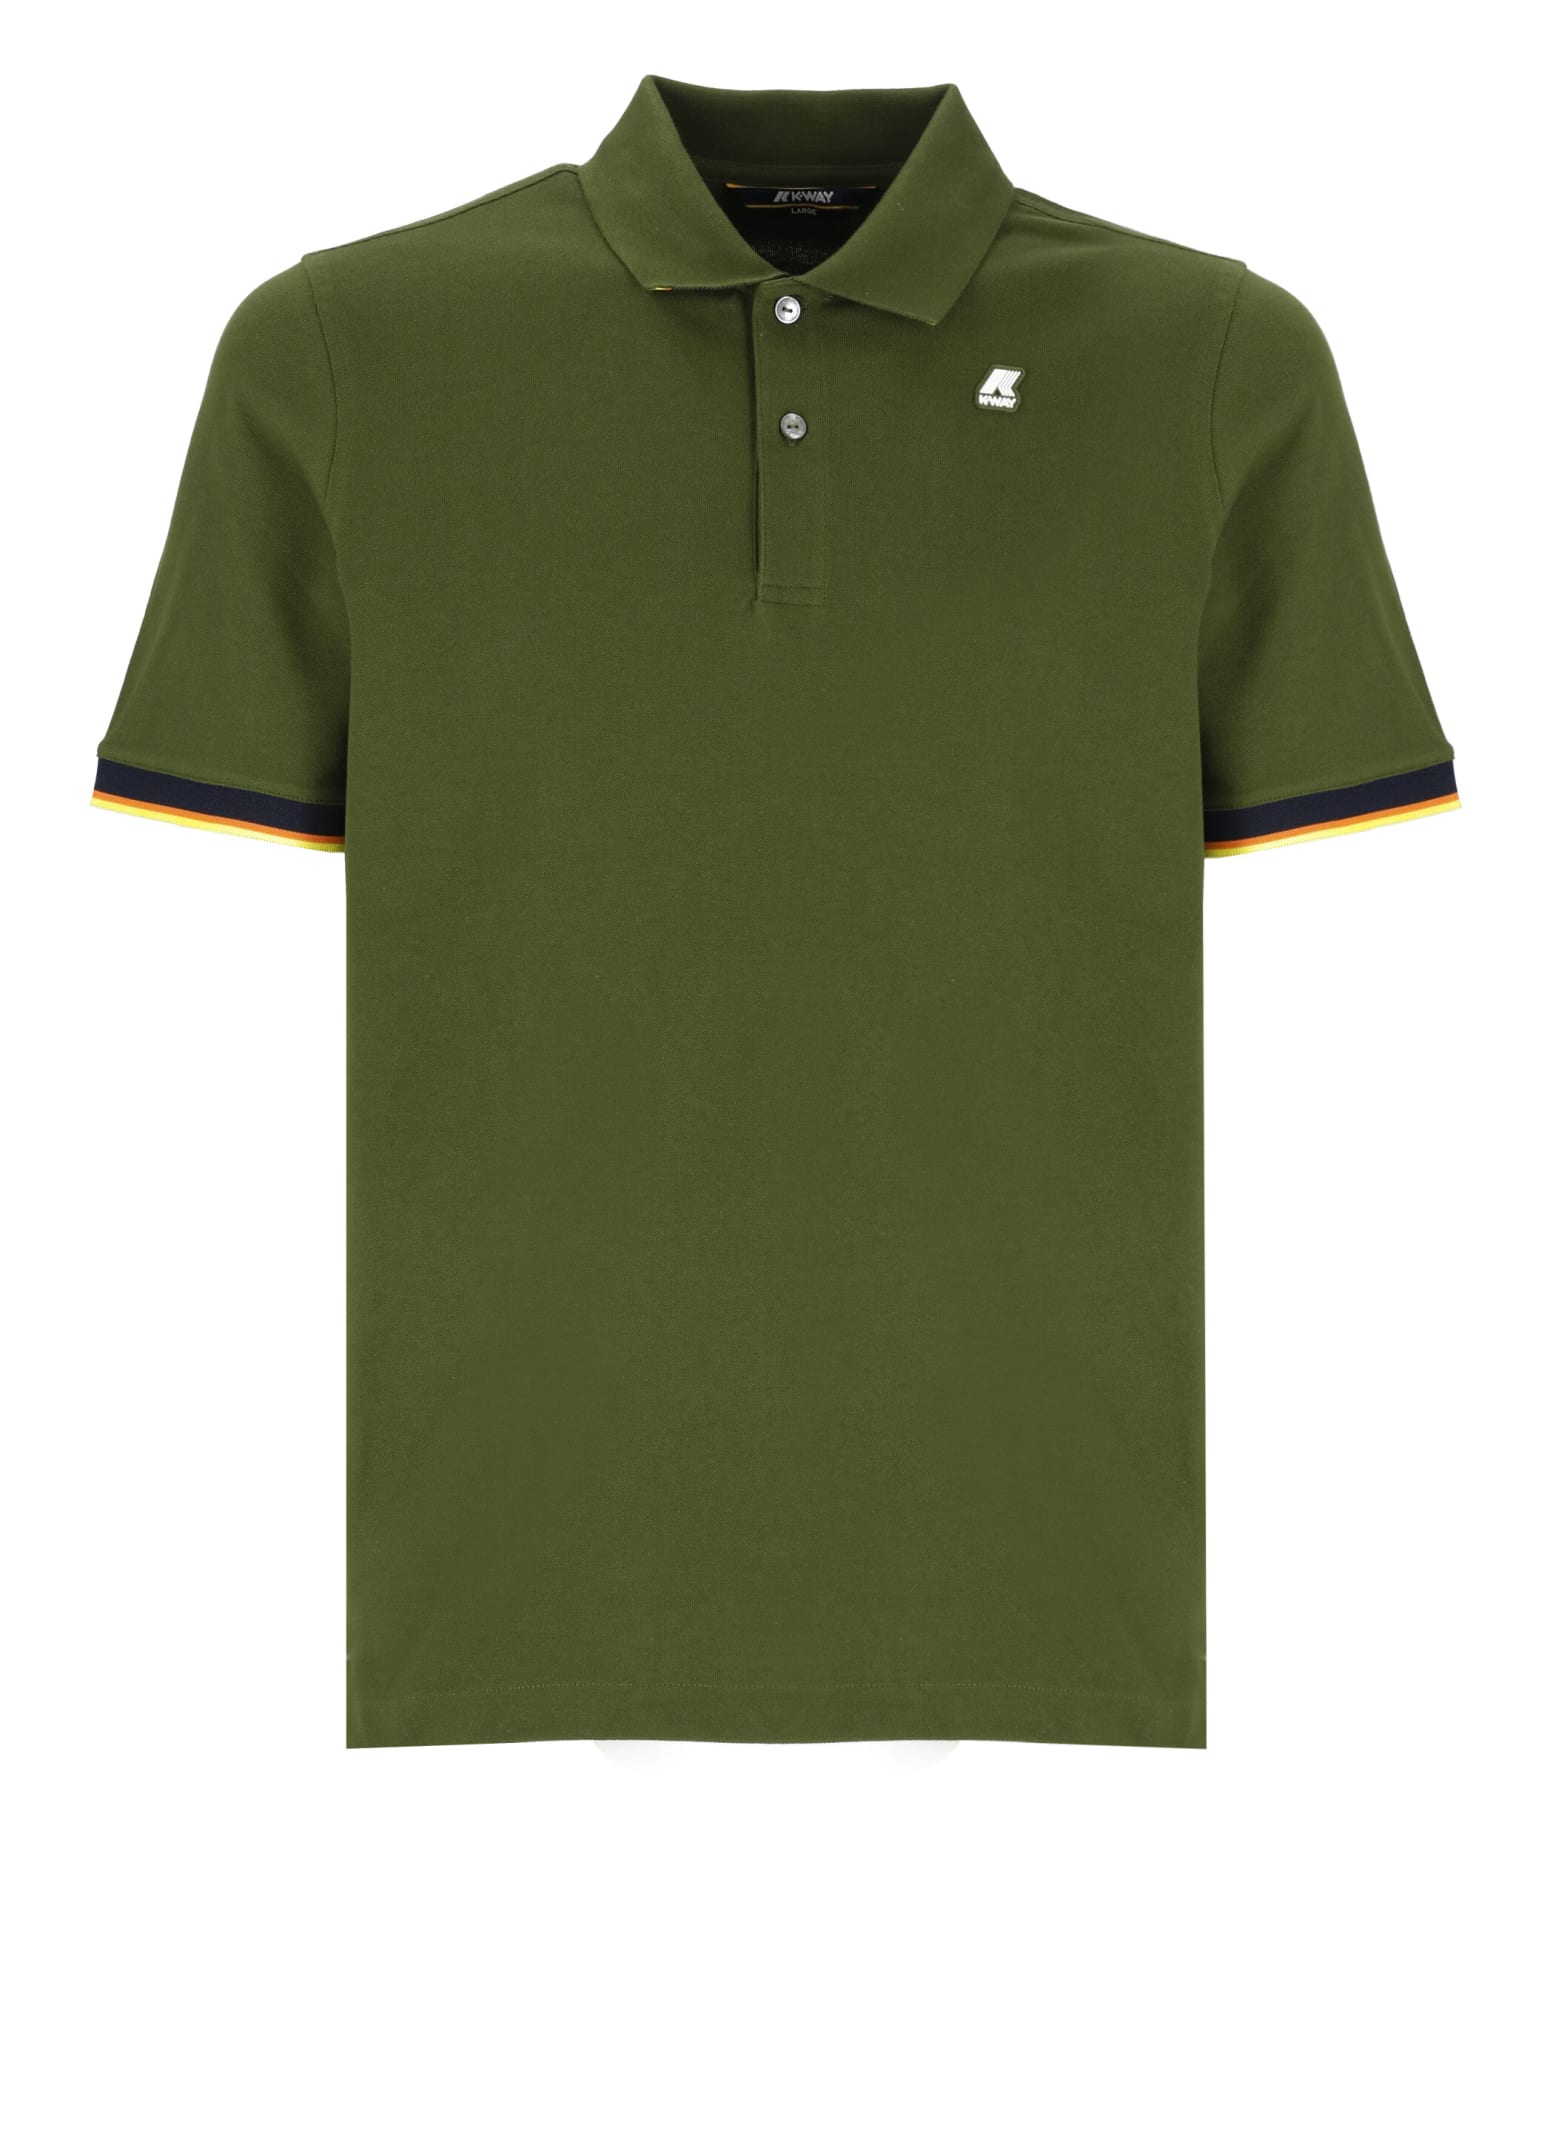 K-way Vincent Polo Shirt In Green